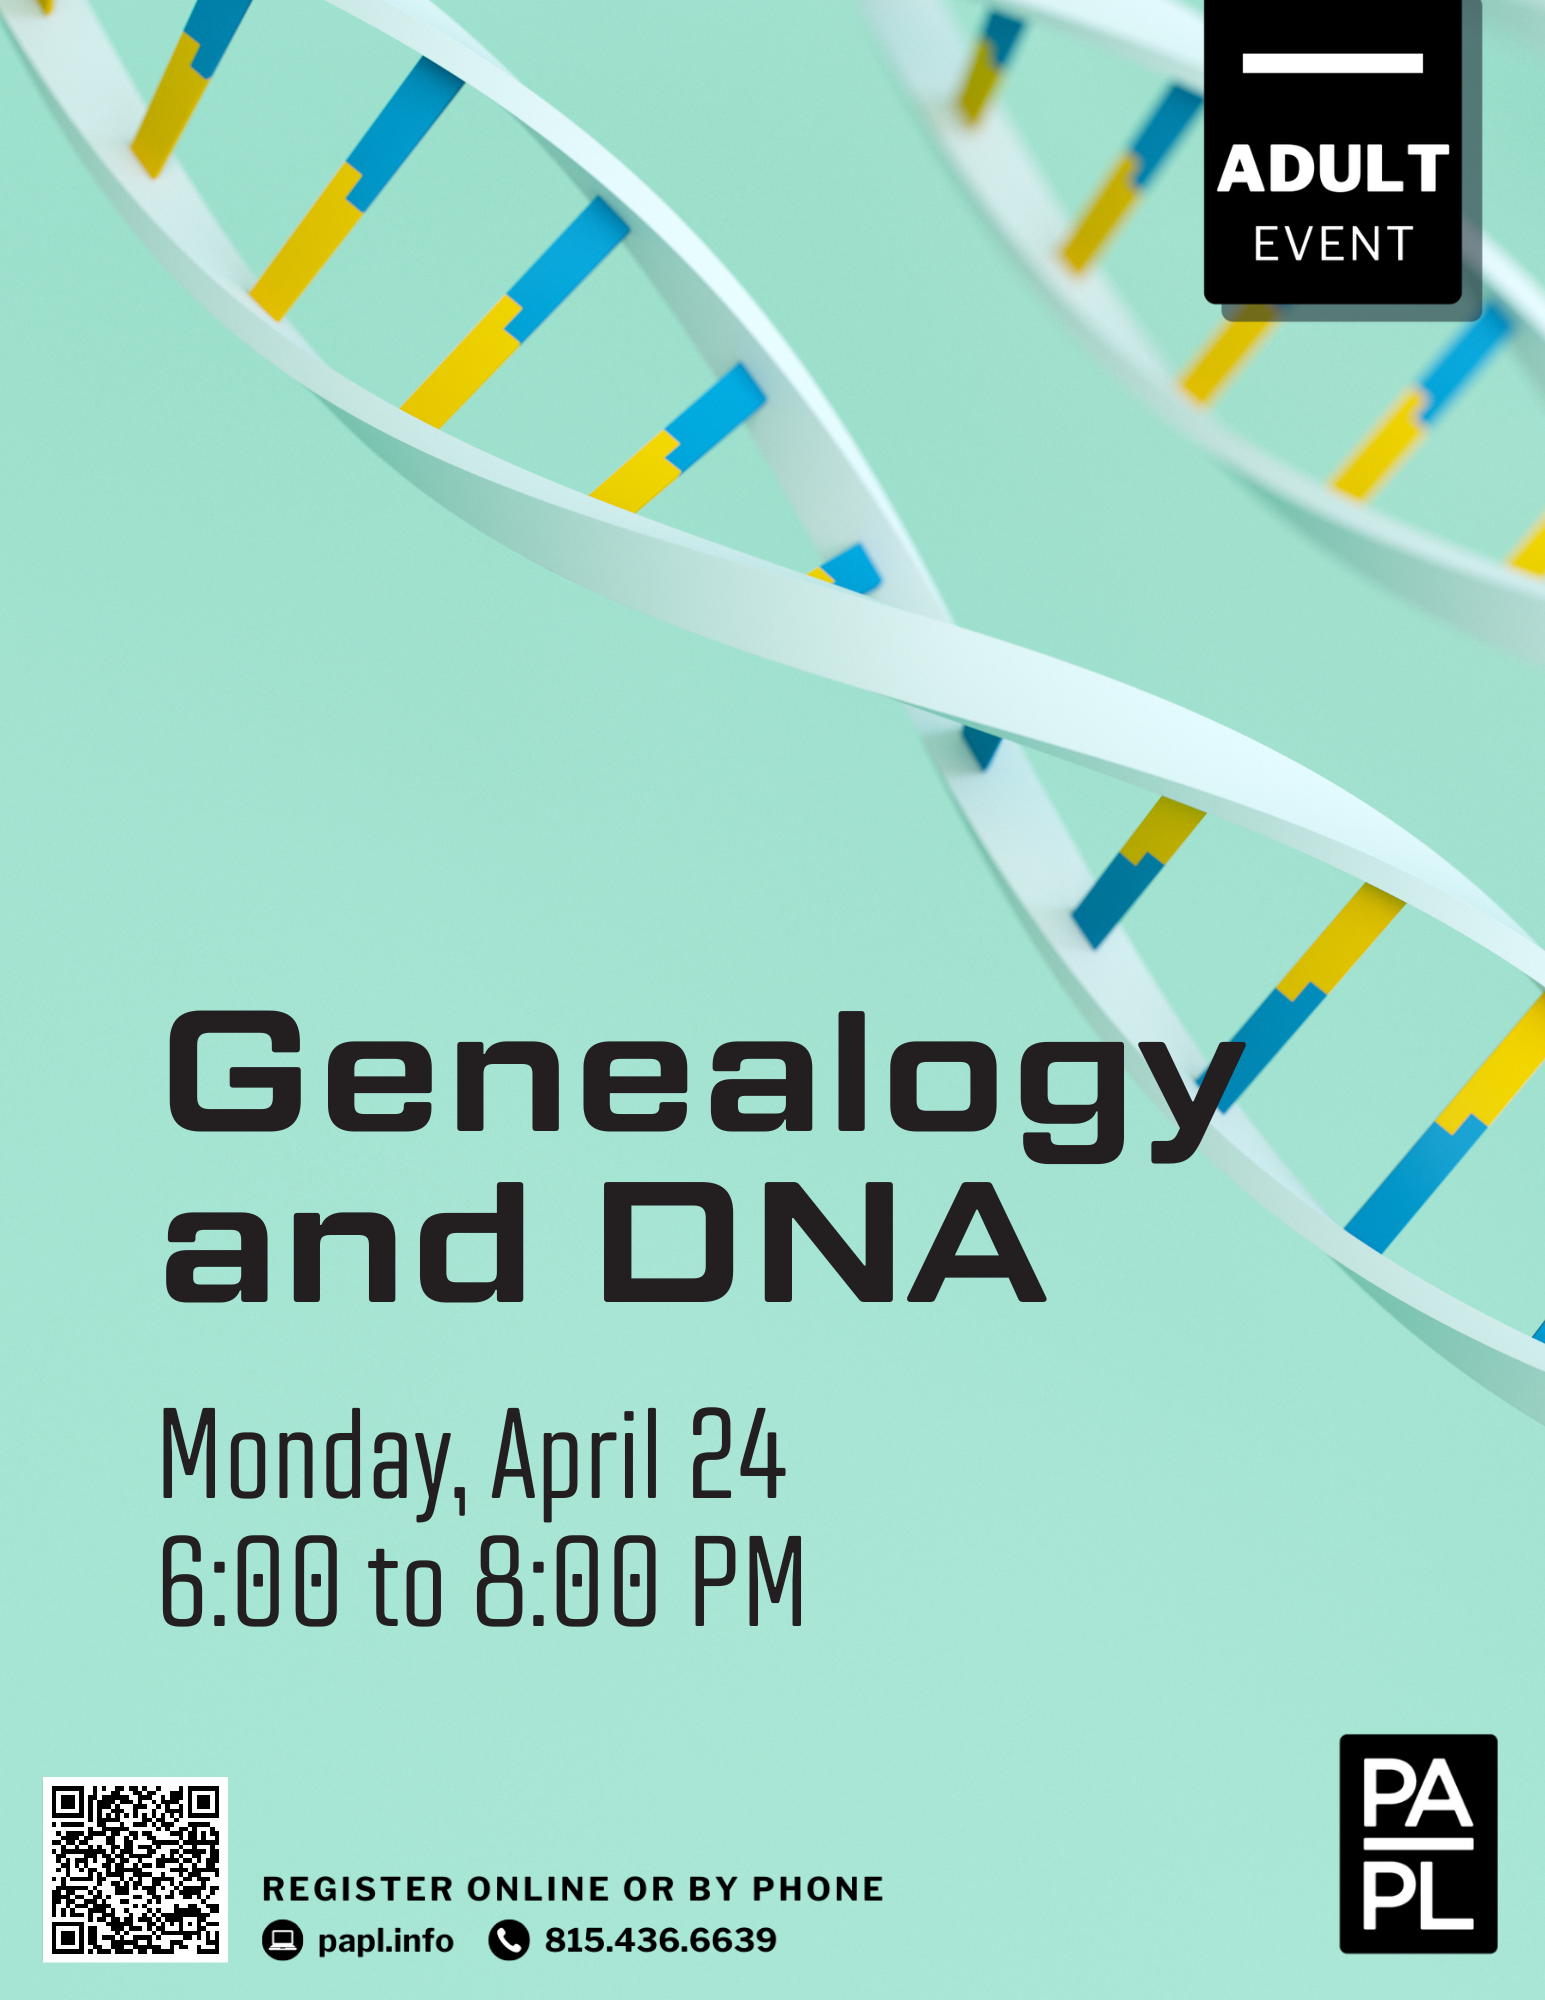 Genealogy and DNA